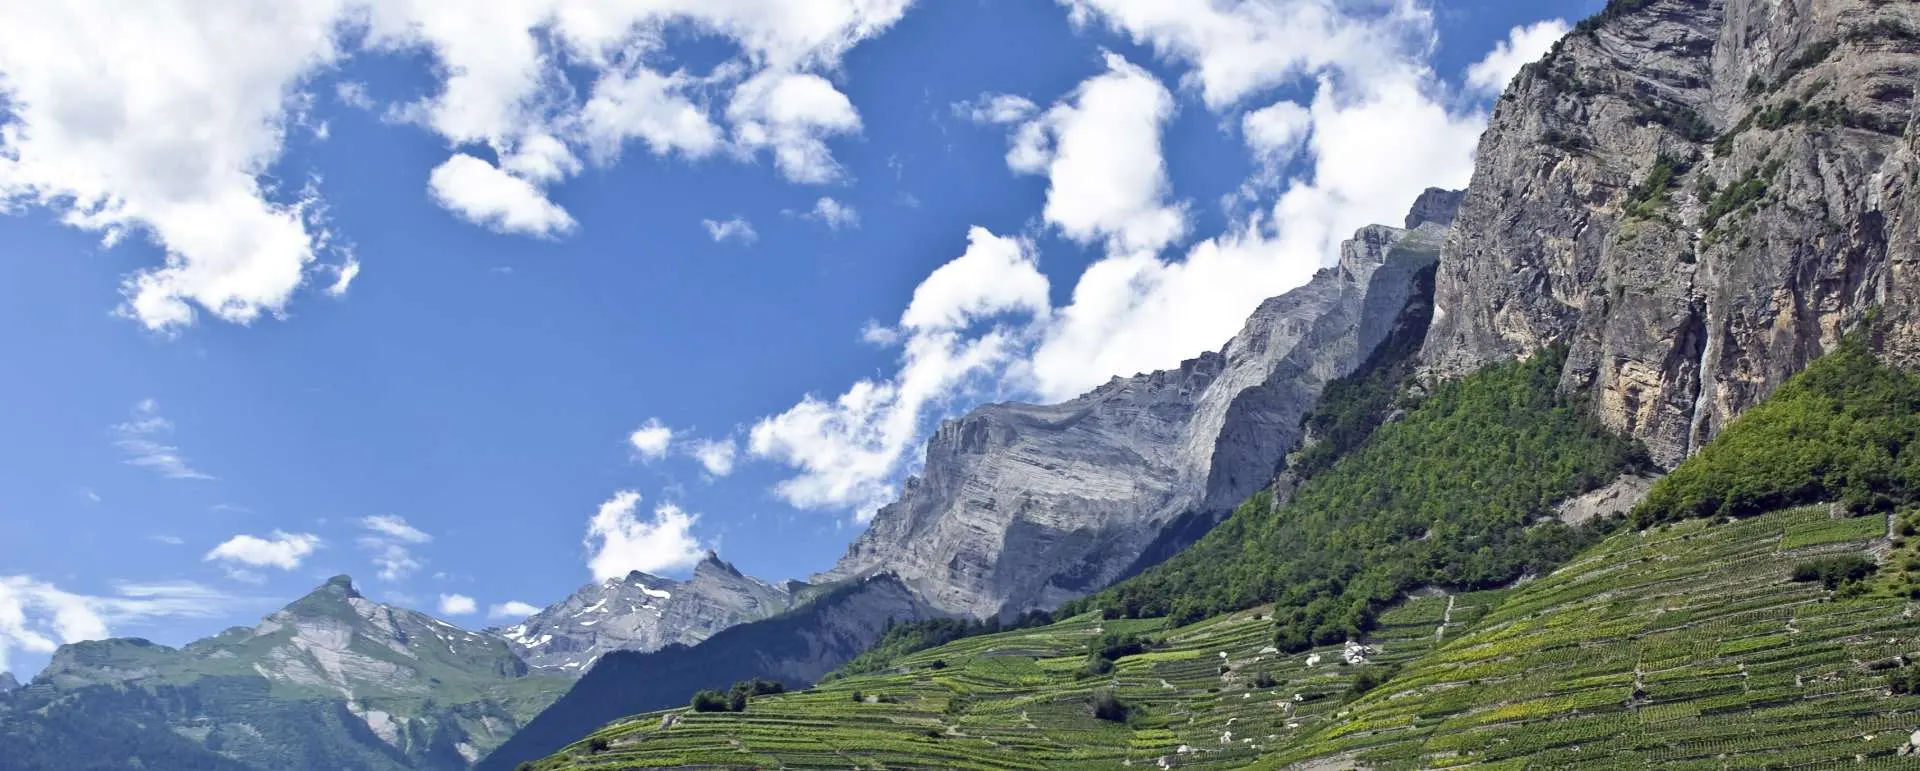 Valais - the destination for group trips